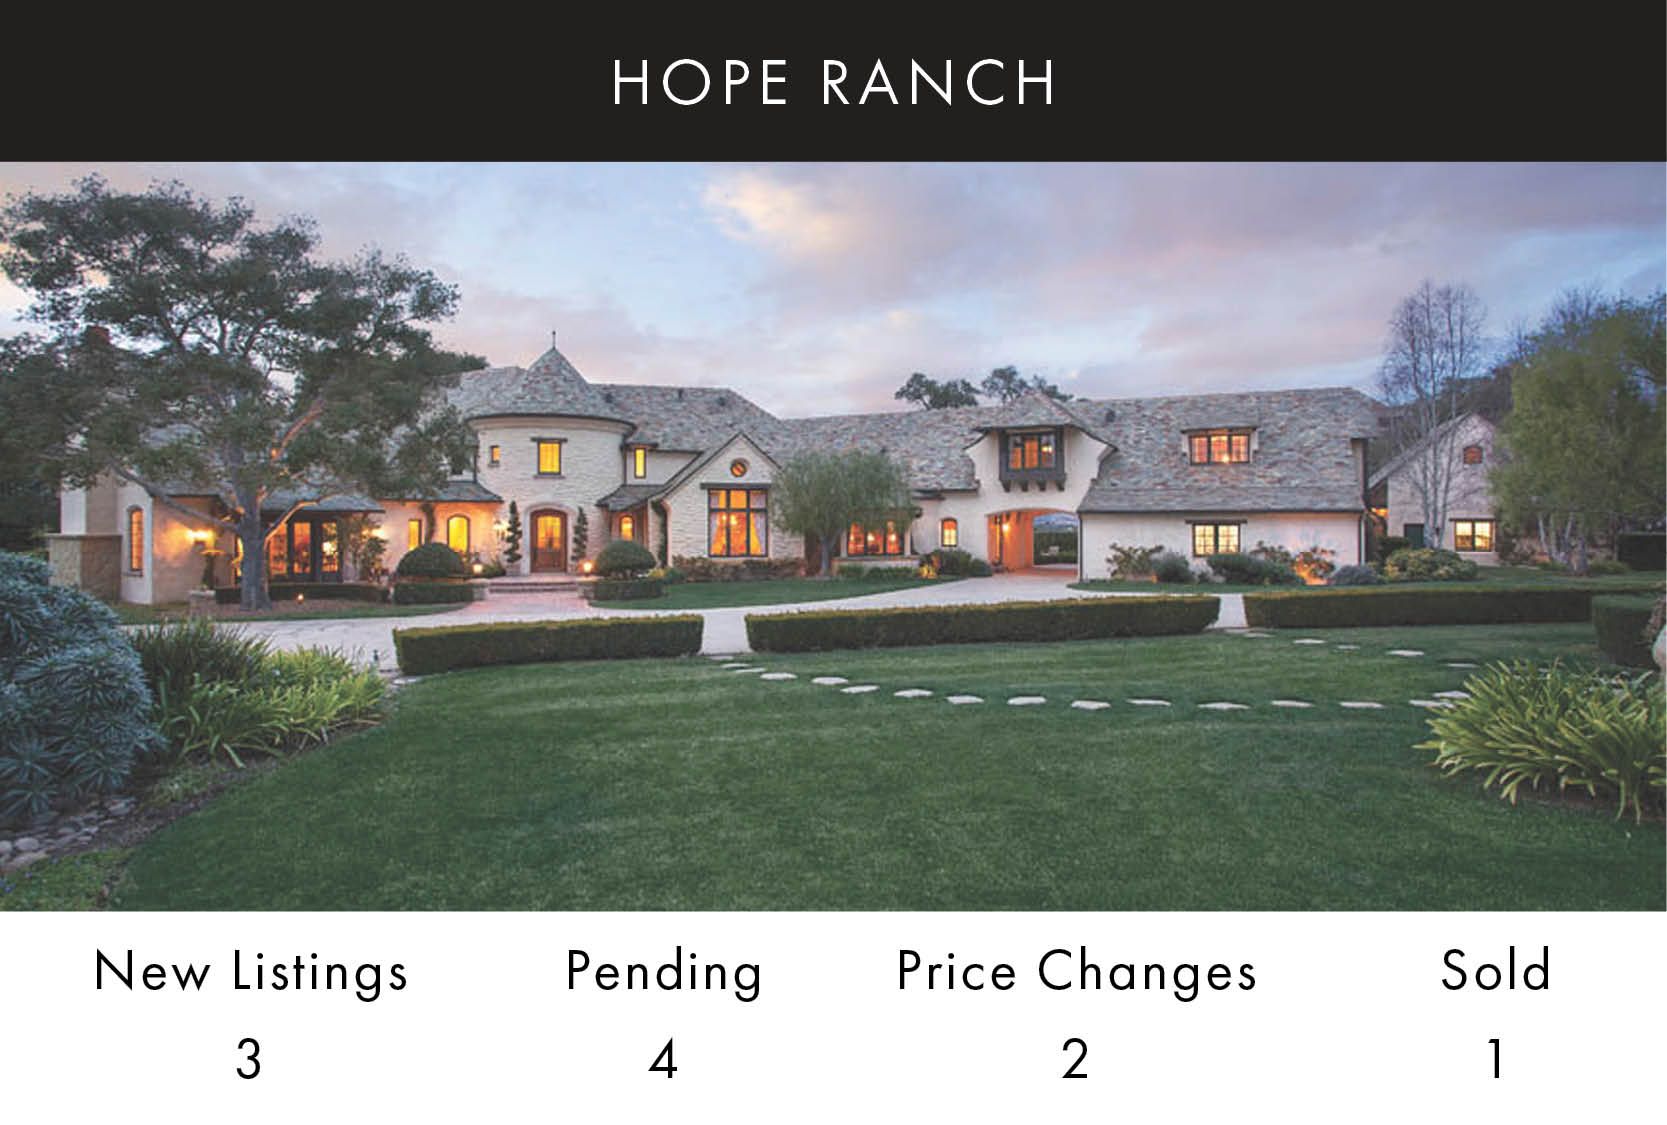 Lawn and large home of a Hope Ranch estate, captioned by August 2022 Hope Ranch home sale statistics